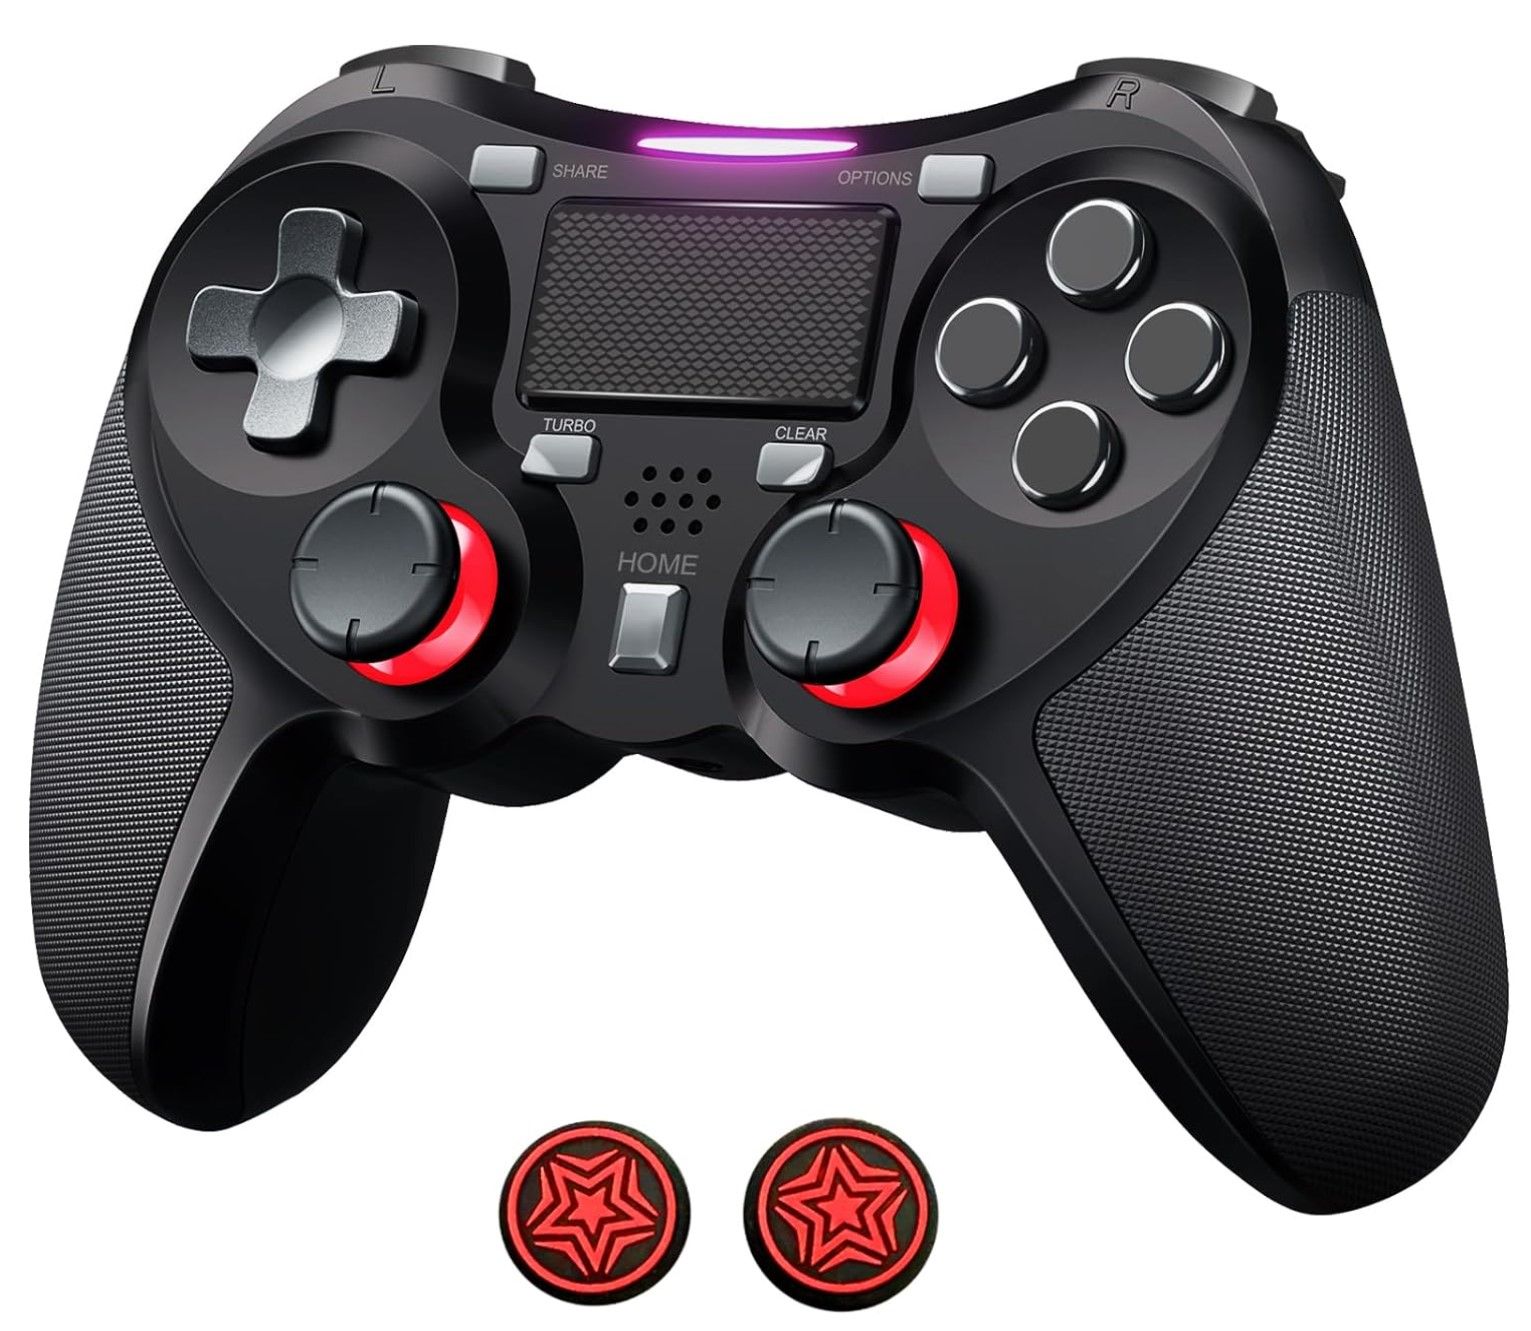 PS4 Controllers: Modern PS4 controllers for gaming lovers